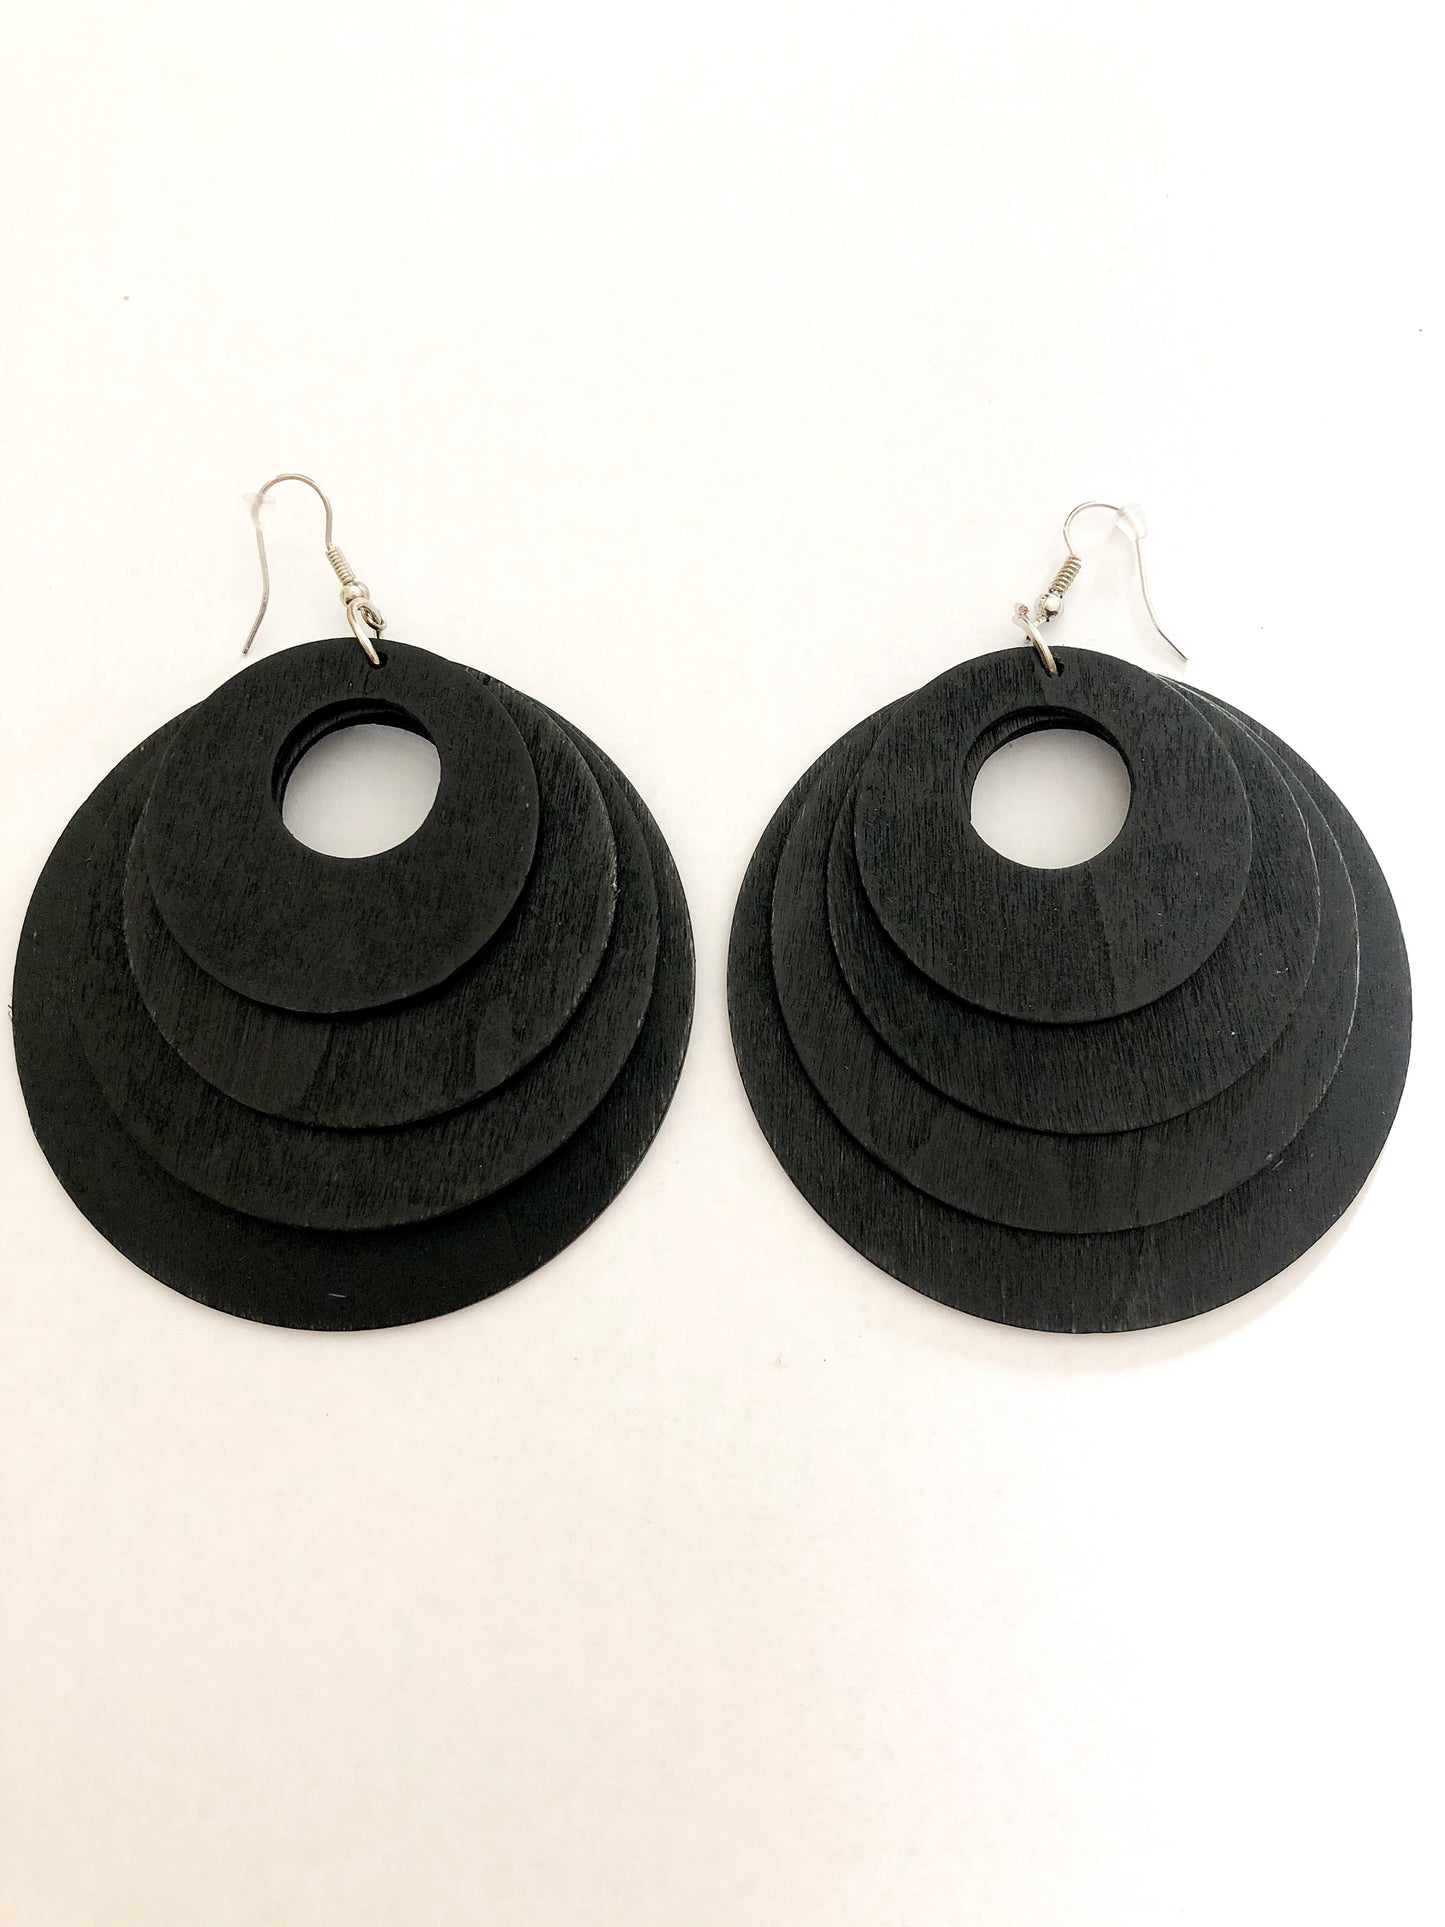 Perfect Circles Wooden Earrings